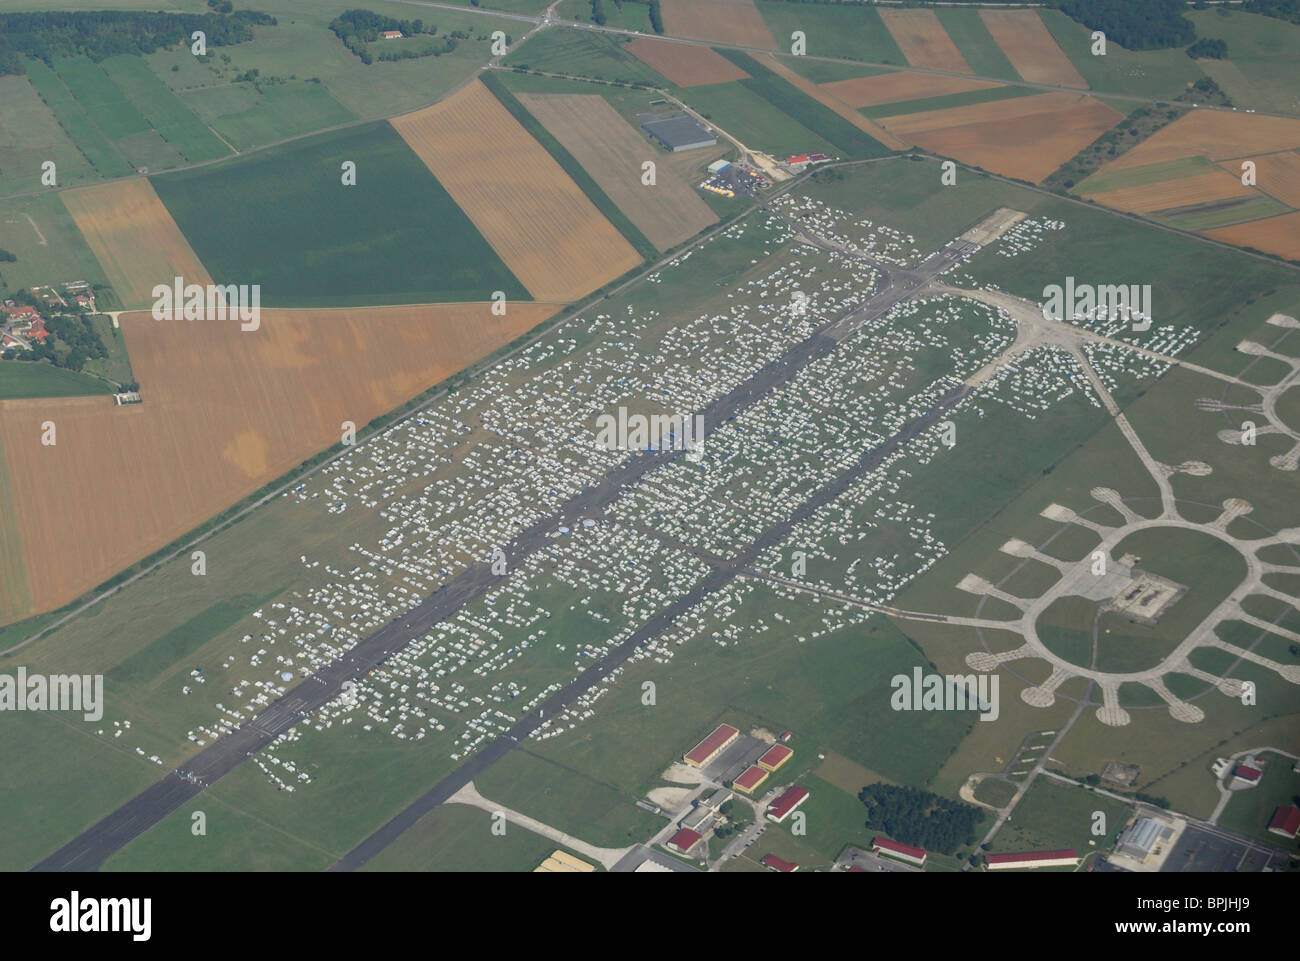 Aerial view of airport of Chaumont occupied by 25 000 gypsies  (20/8/010), Haute Marne, Champagne-Ardenne region, France Stock Photo